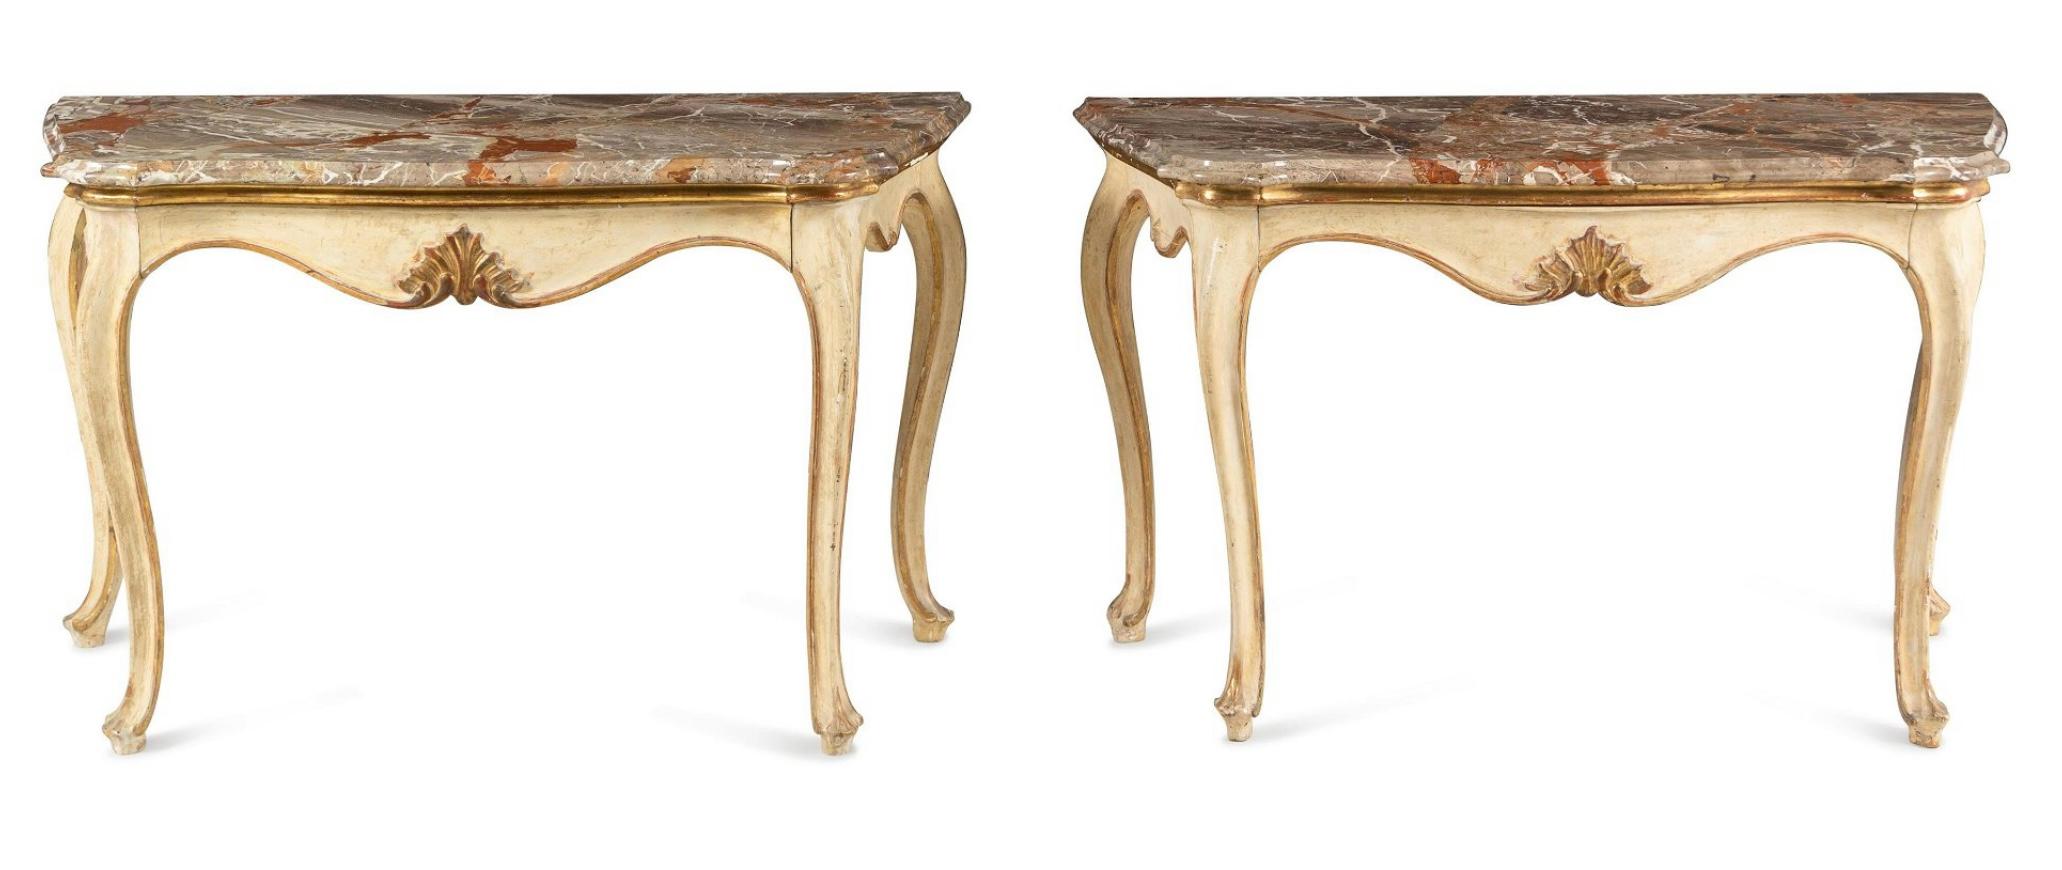 Pair of 19th Century Italian Painted and Gilt Marble-Top Console Tables For Sale 6